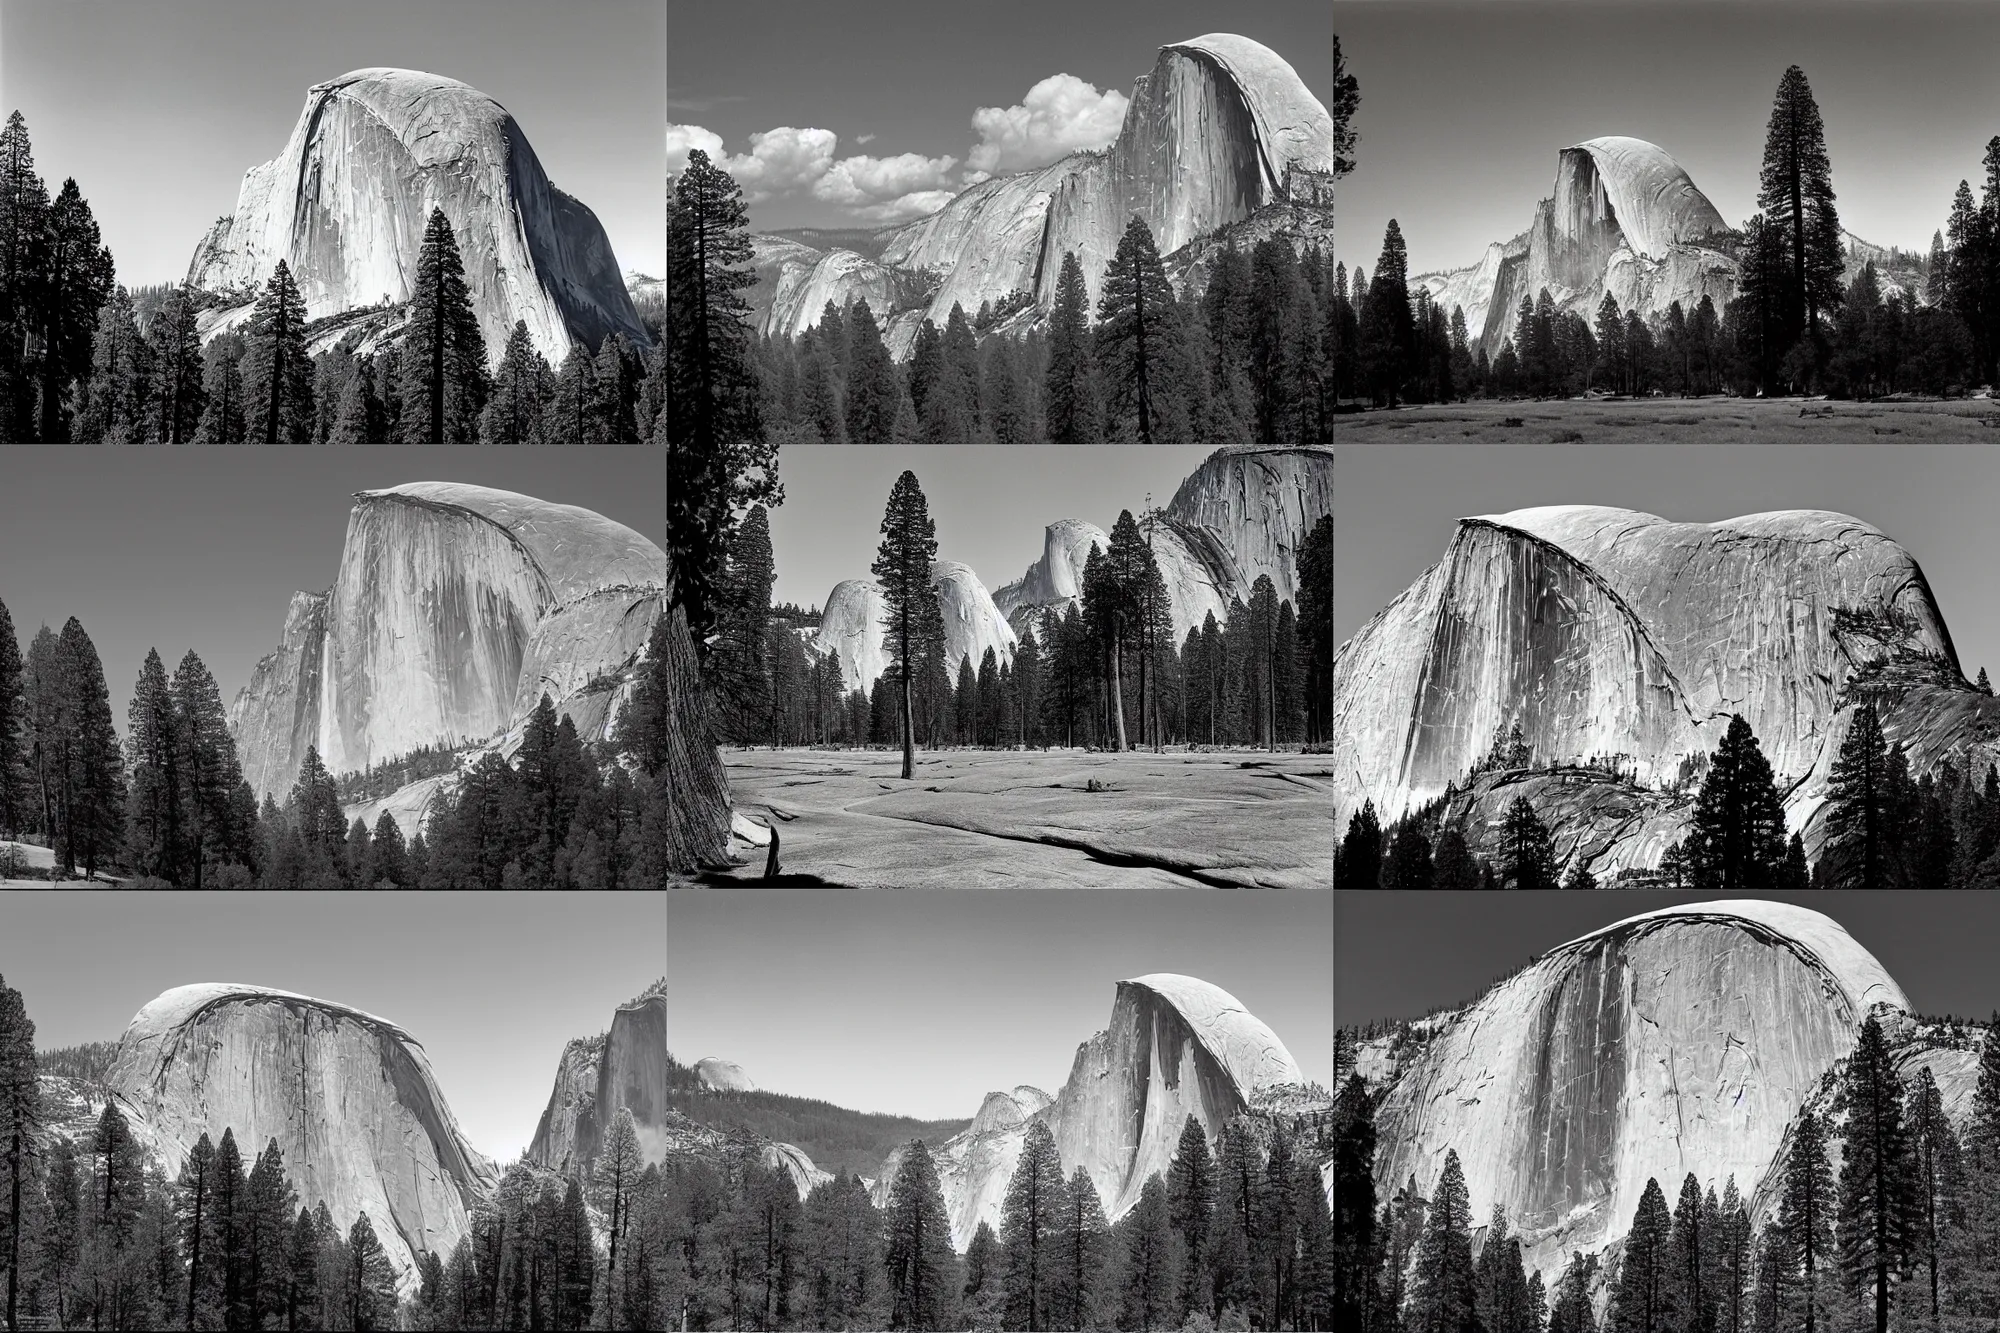 Prompt: photo of half dome yosemite by ansel adams